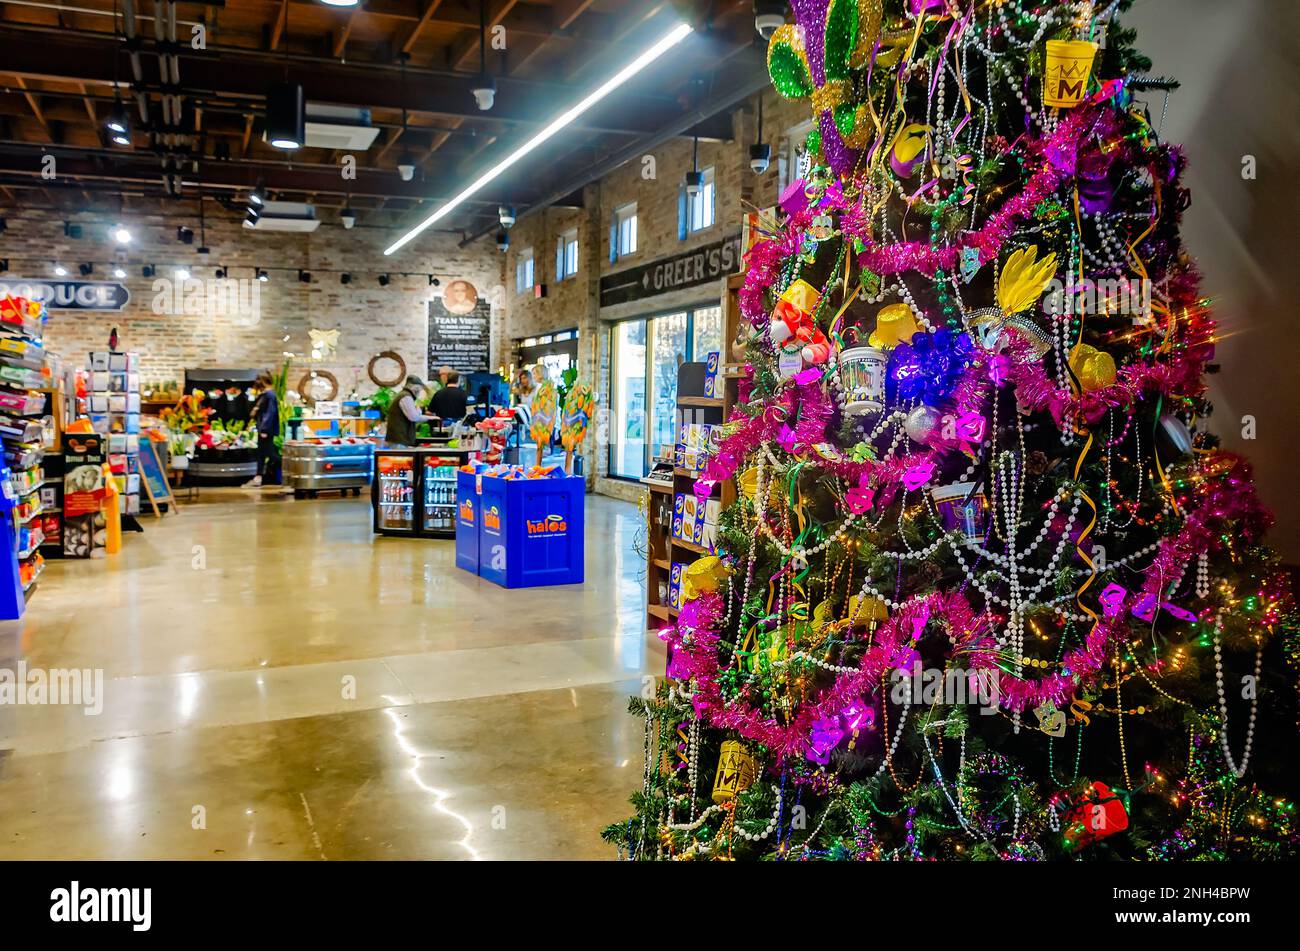 A Mardi Gras tree stands in Greer’s St. Louis Market on St. Louis Street, Jan. 6, 2023, in Mobile, Alabama. Stock Photo